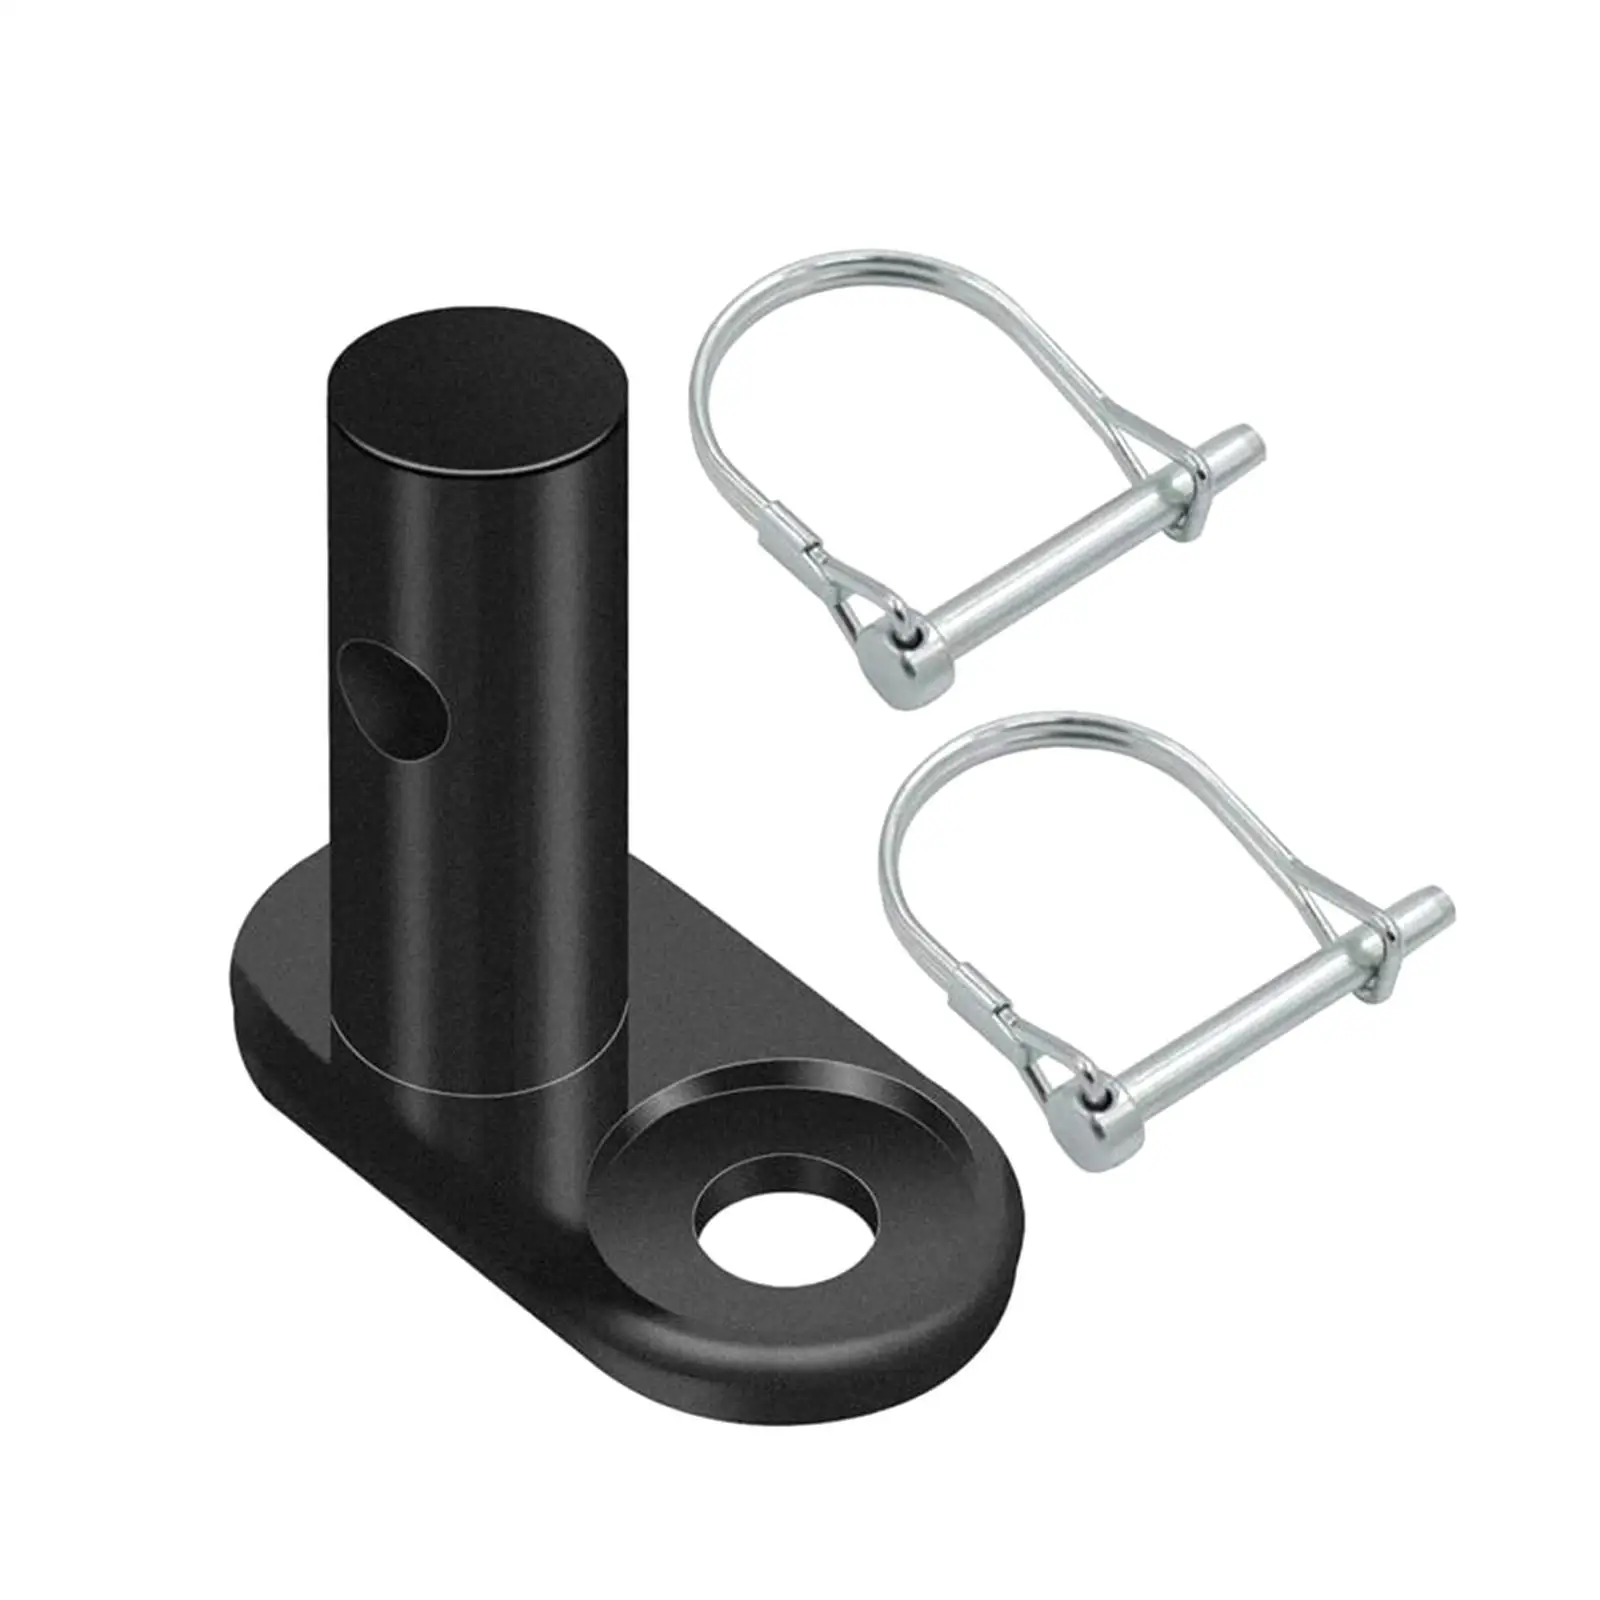 Bike Trailer Hitch Replacement Carbon Steel Bike Trailer Attachment Mount Adapter for Pets Trailers Cycling Equipment